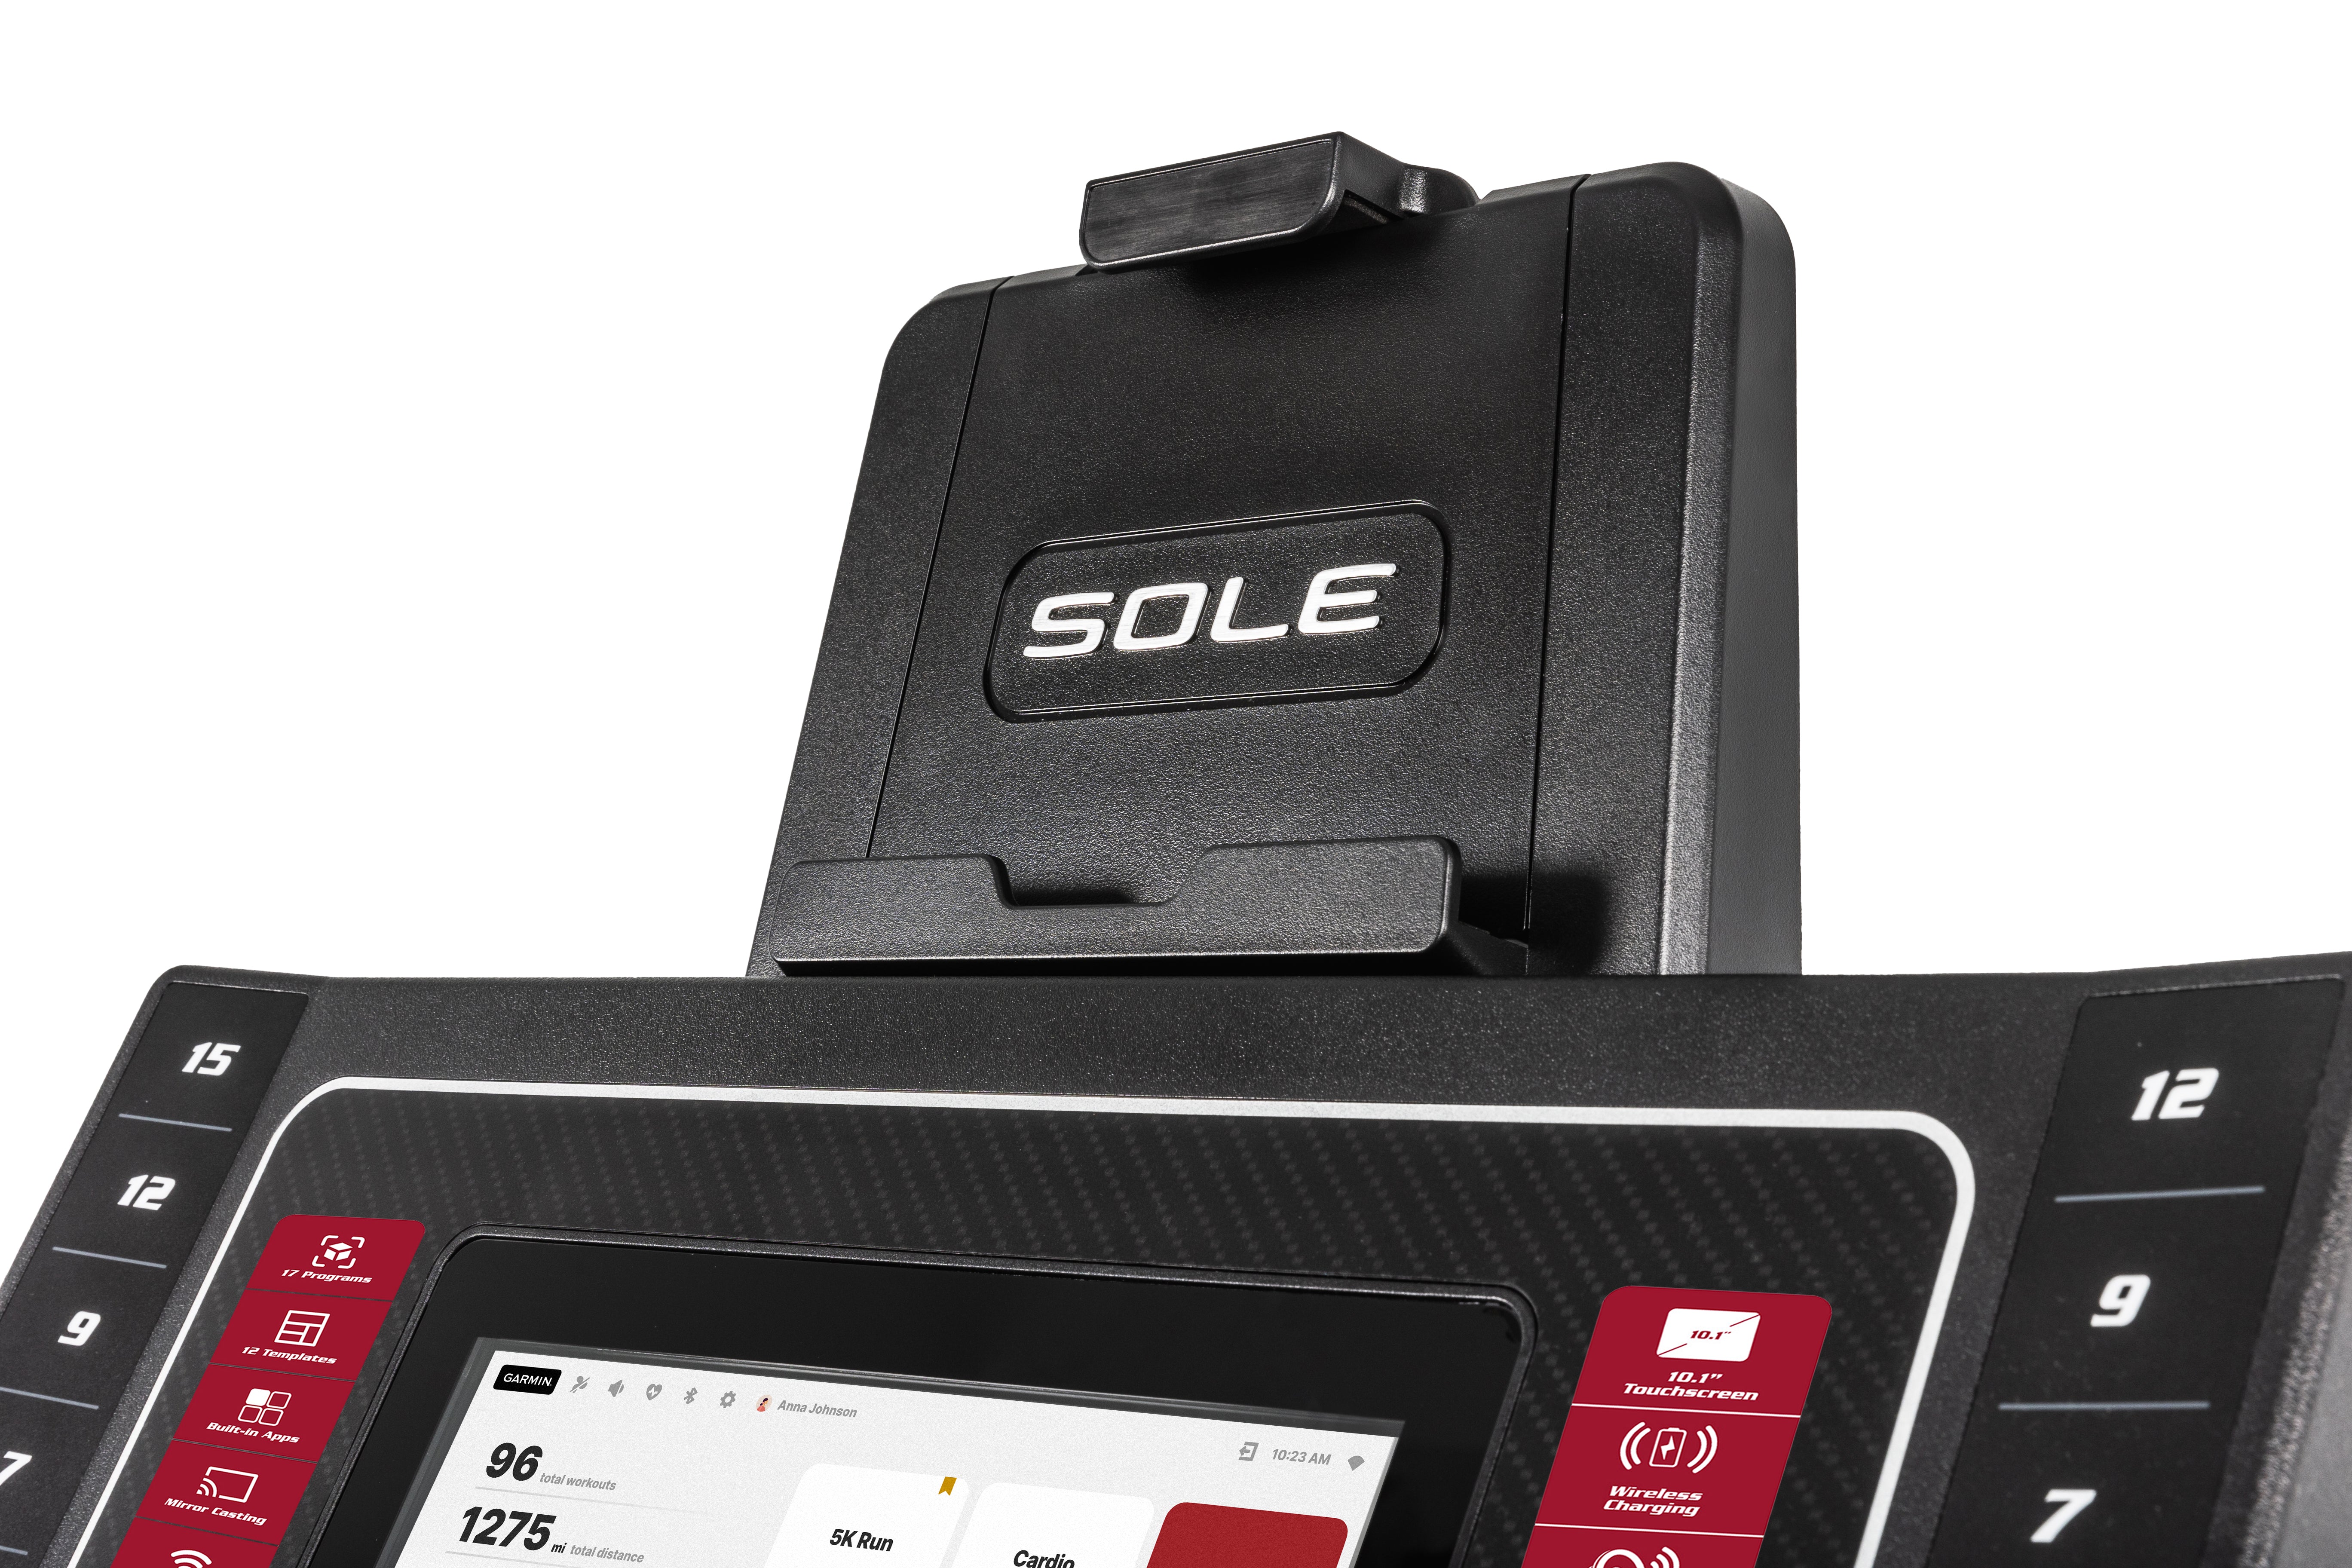 Detailed shot of the Sole F80 treadmill's upper console, showcasing the embossed 'SOLE' logo on the tablet holder, the digital touchscreen with workout stats, and side quick-control buttons for incline and speed settings